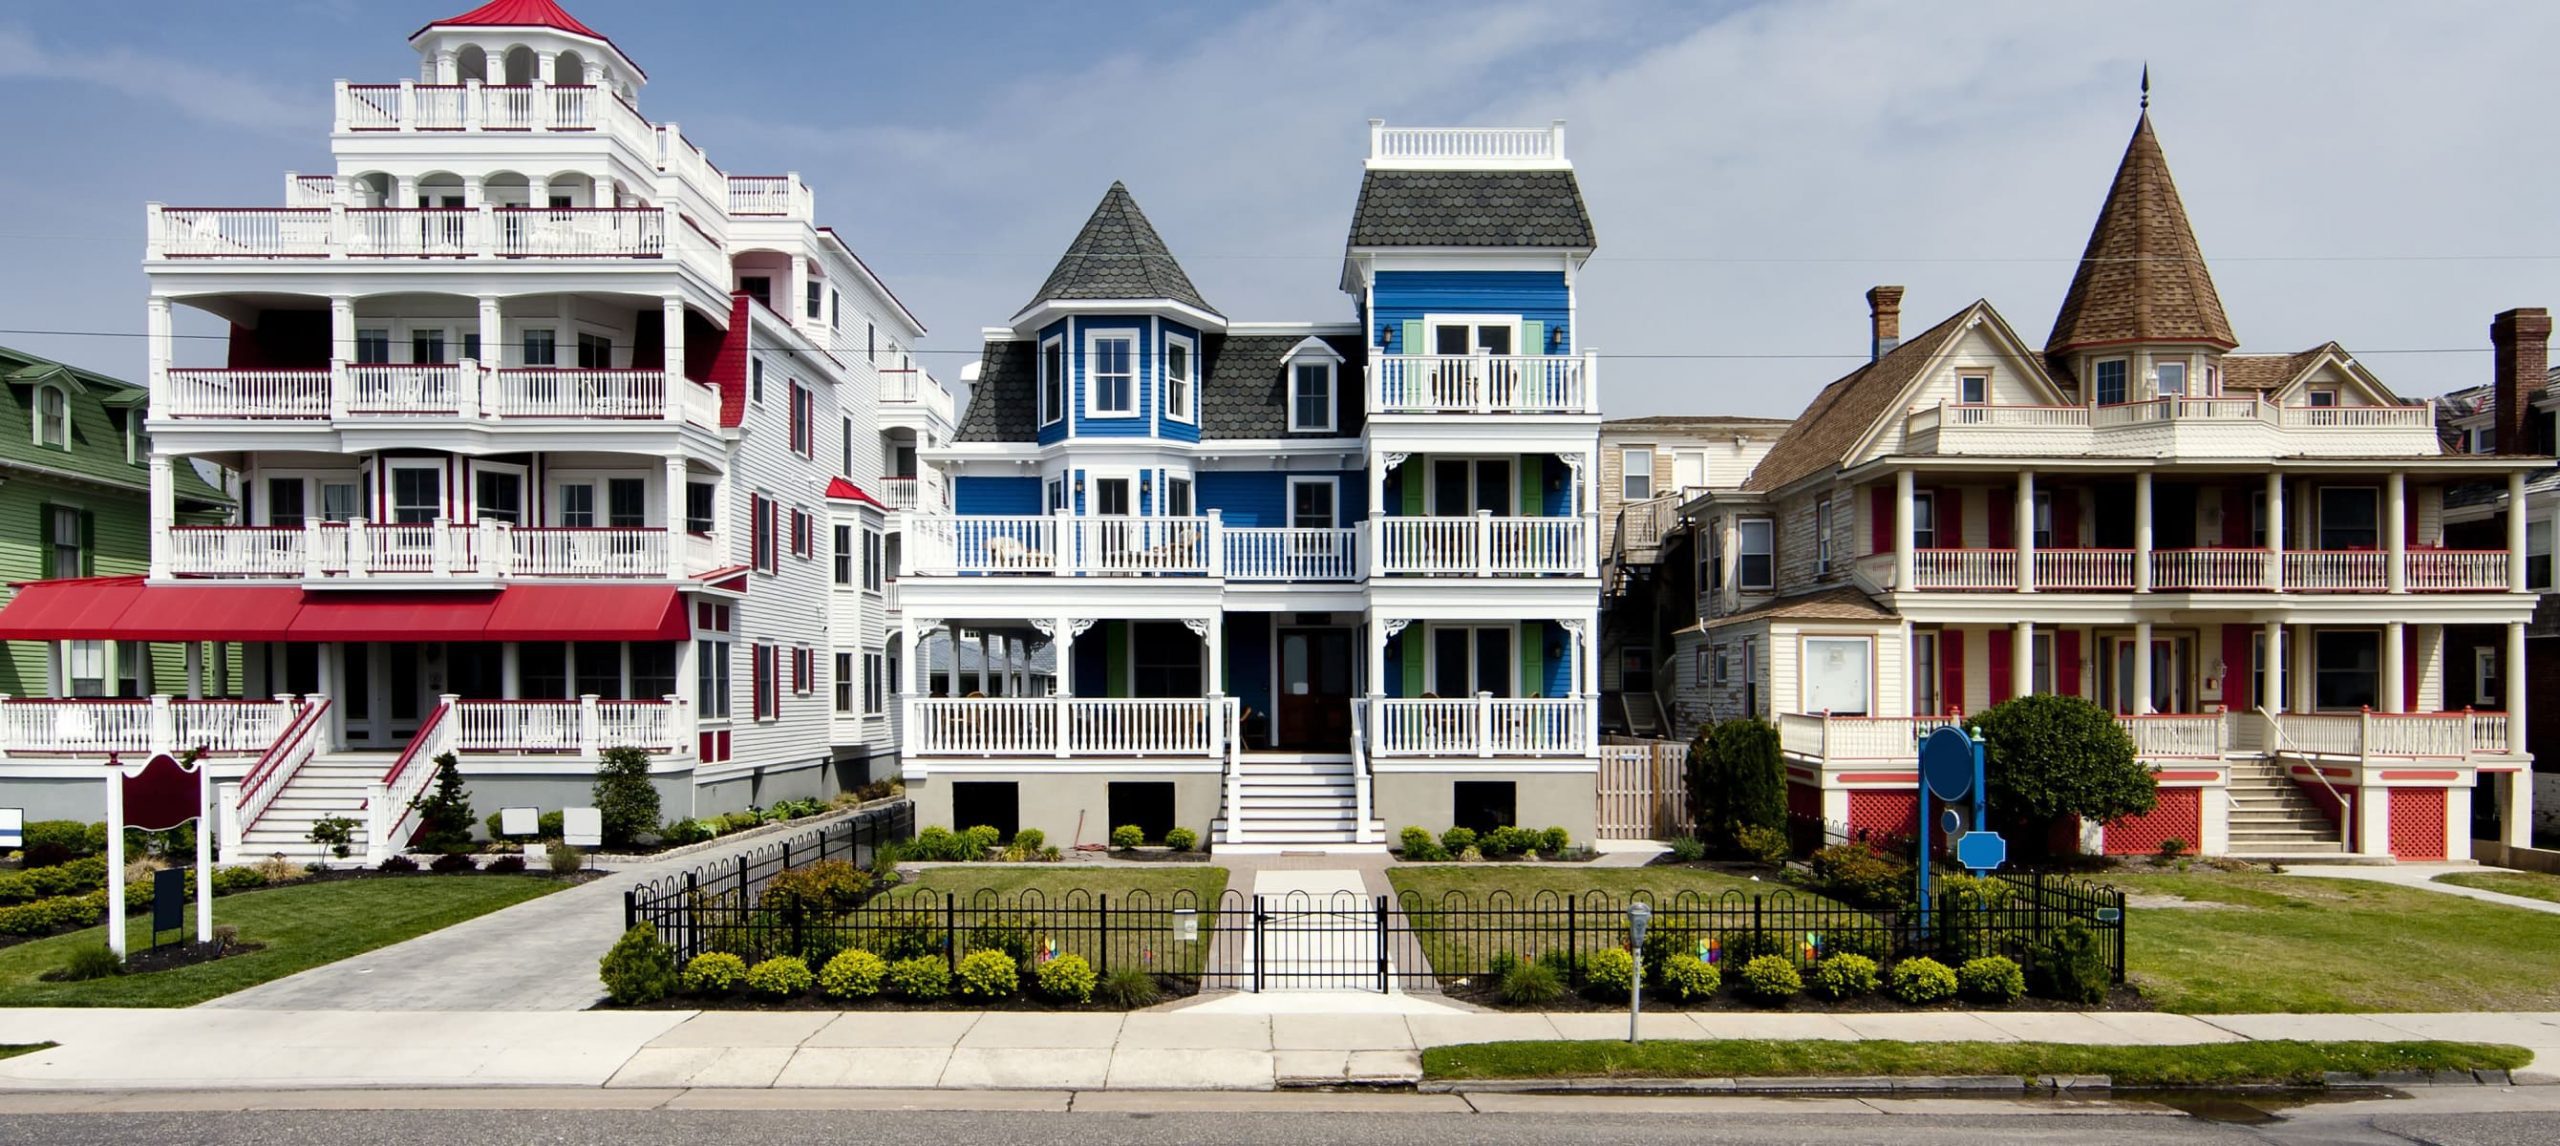 Victorian houses in Cape May